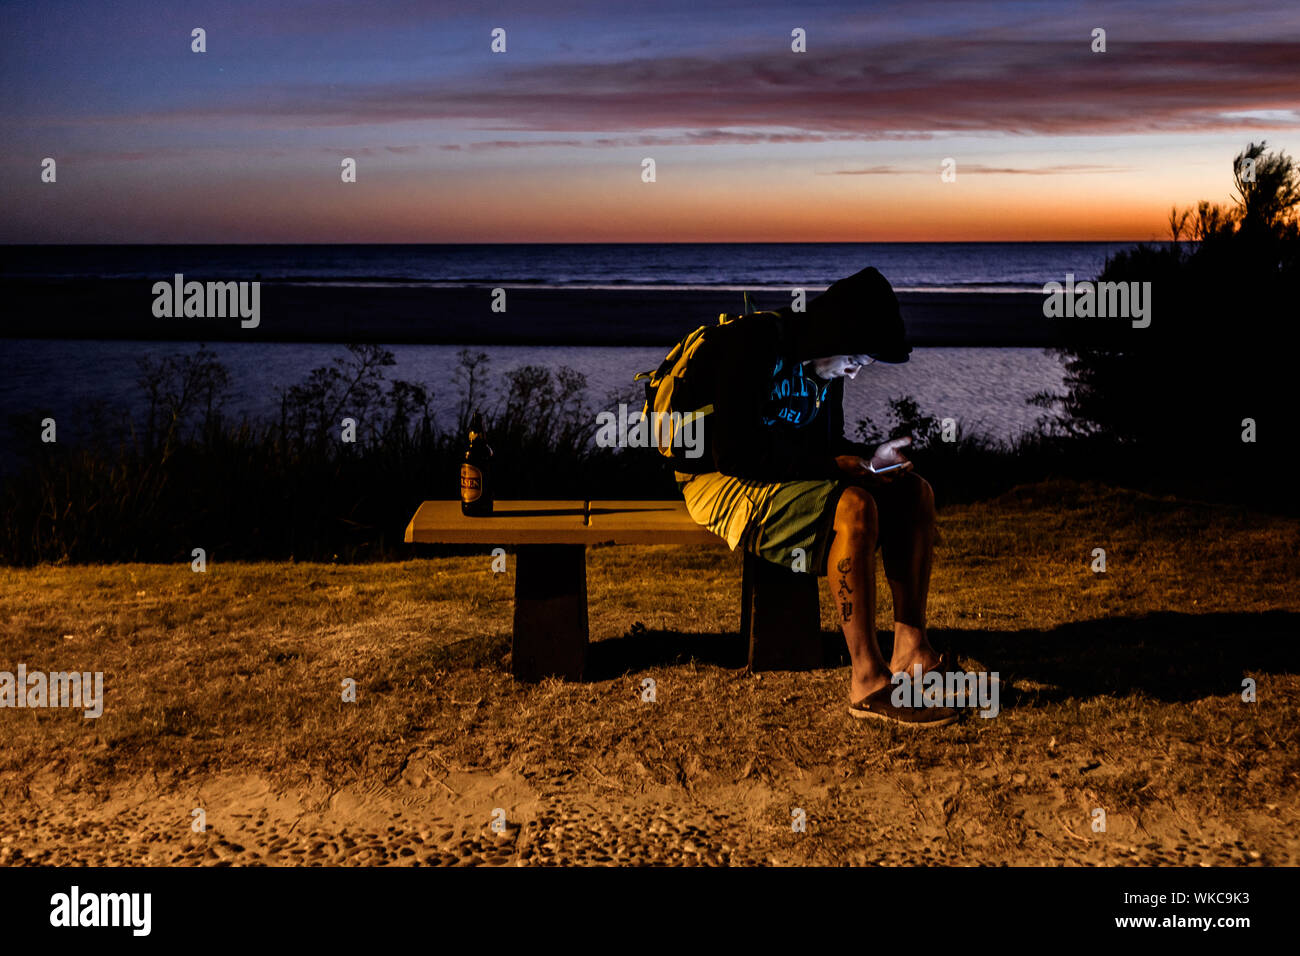 Uruguay: Uruguay, La Floresta, small city and resort on the Costa de Oro (Golden Coast). At dusk, a young boy is seated on a bench, facing the Rio de Stock Photo